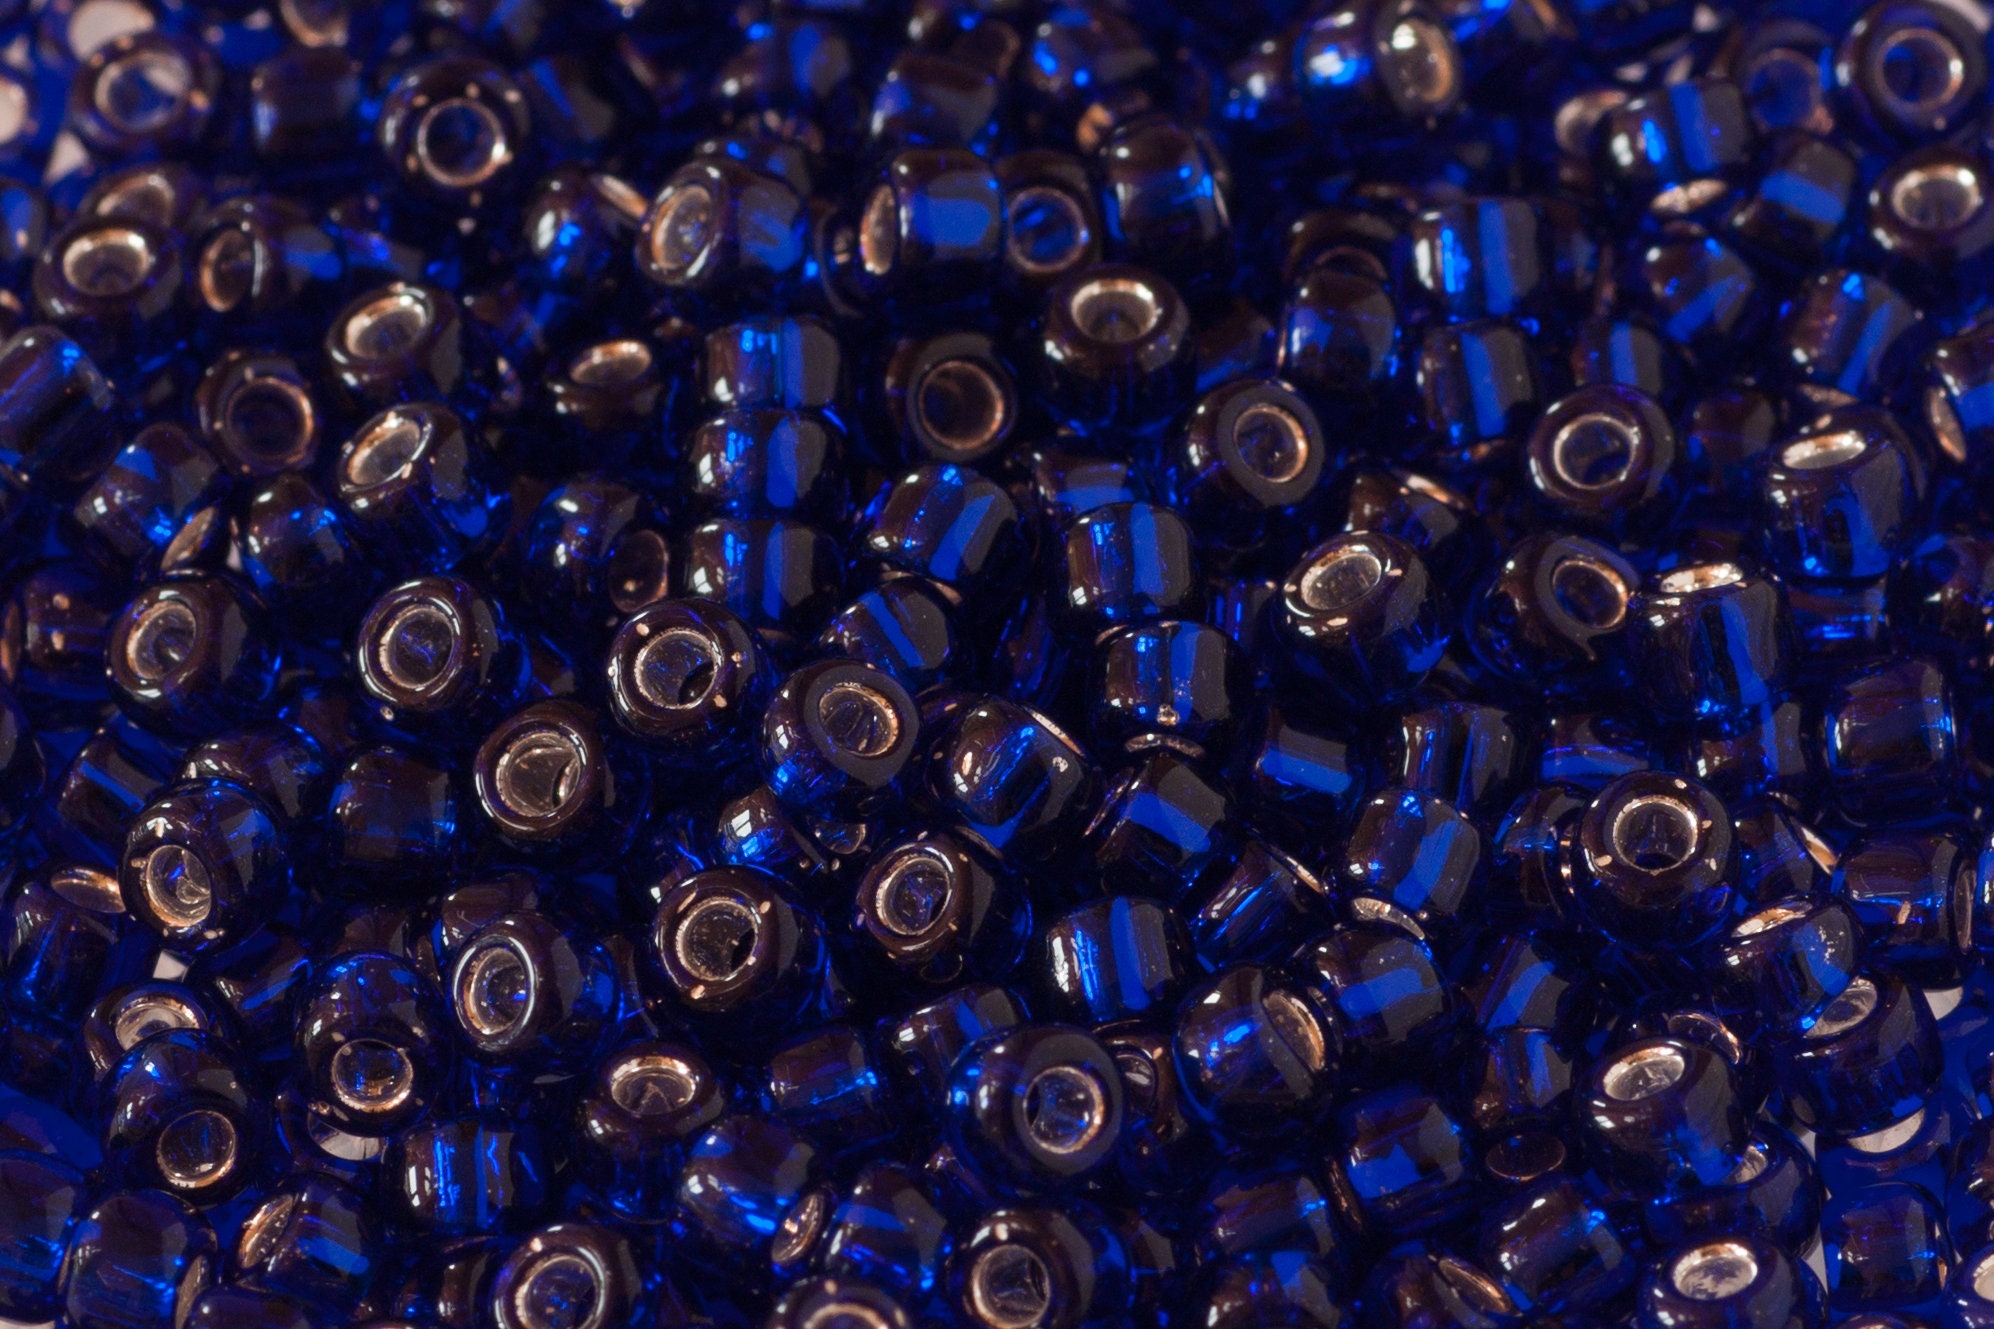 Peacock Blue Glass Seed Beads, 4mm Glass Seed Bead, Crystal Grass Beads  Bulk for Clothingsmall Beads,Small Beads for Bracelets Ornaments, Glass  Beads